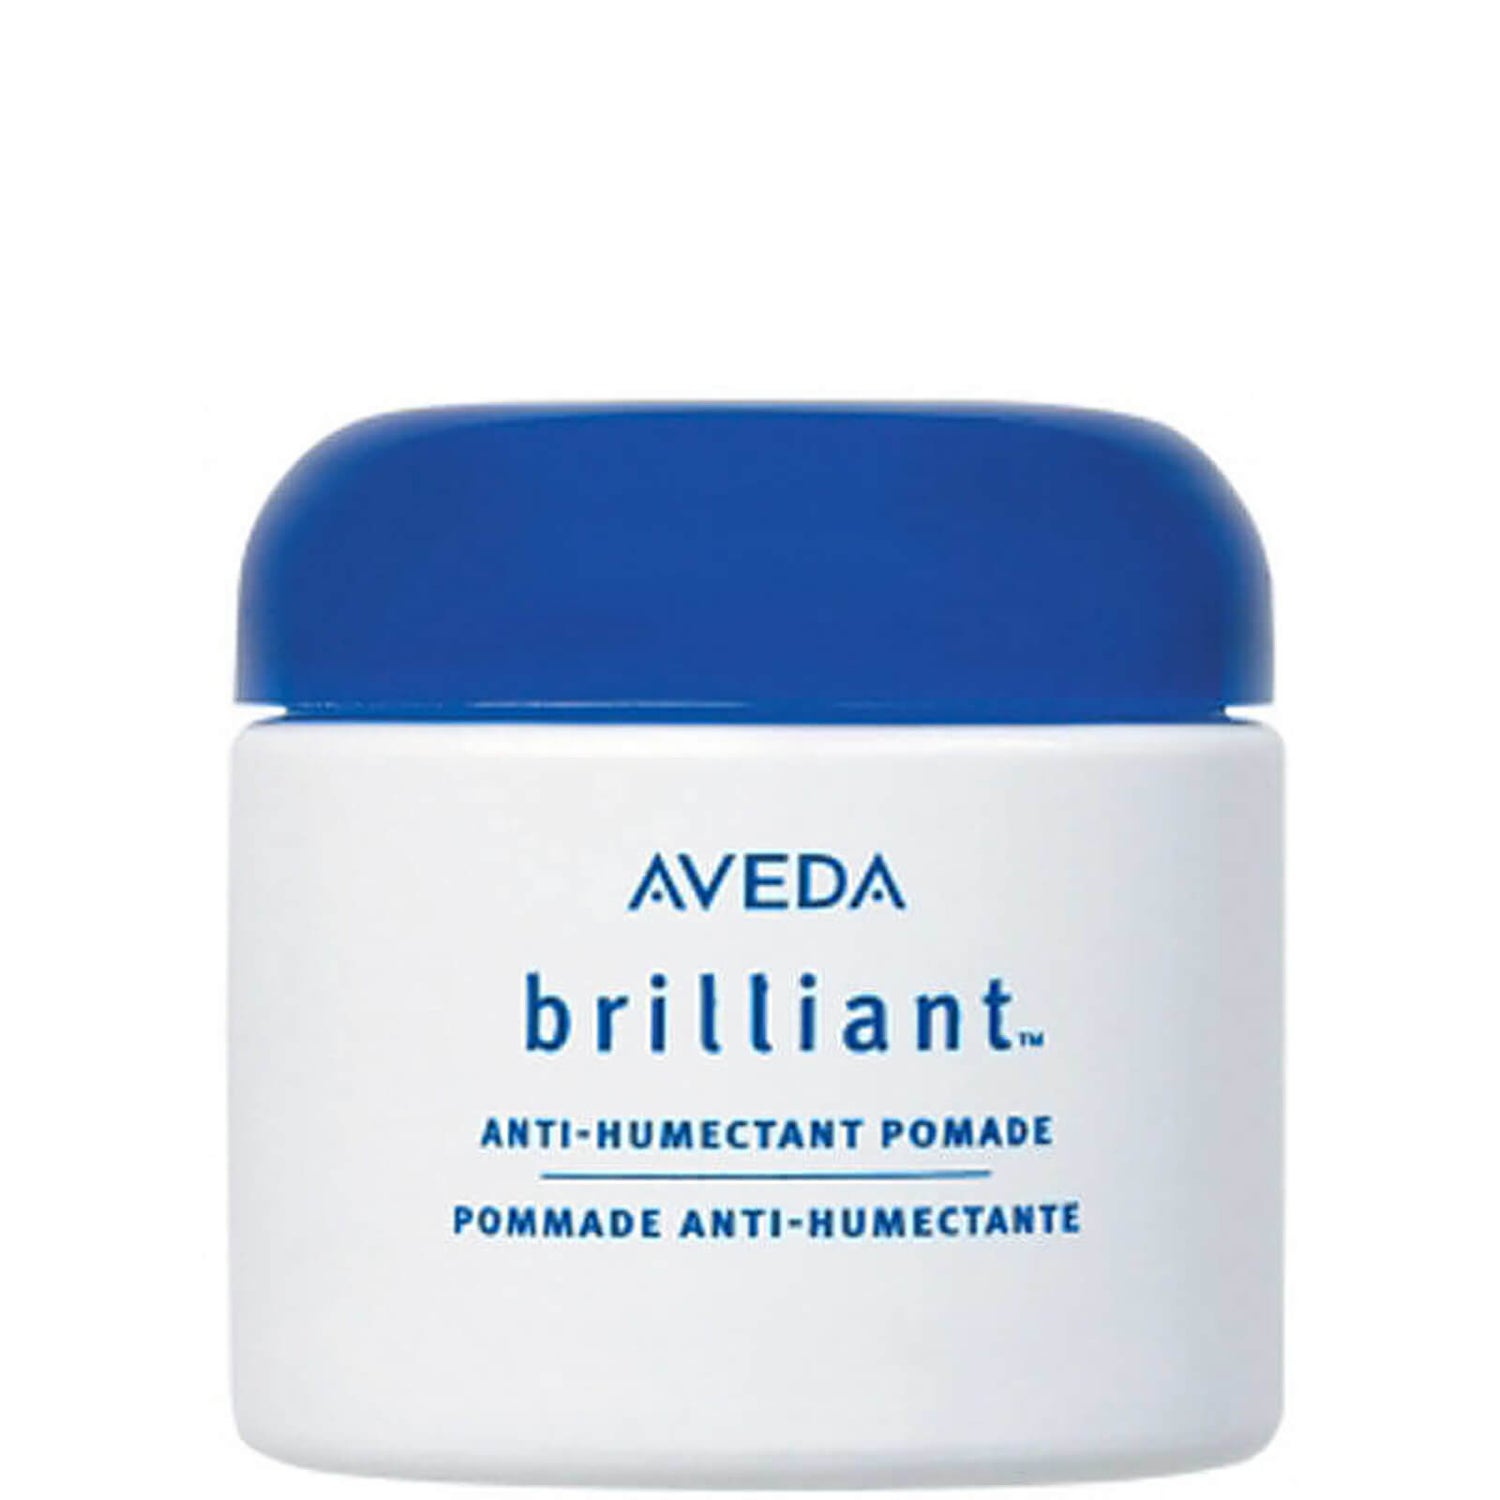 Aveda Pommade anti-humectante 75ml